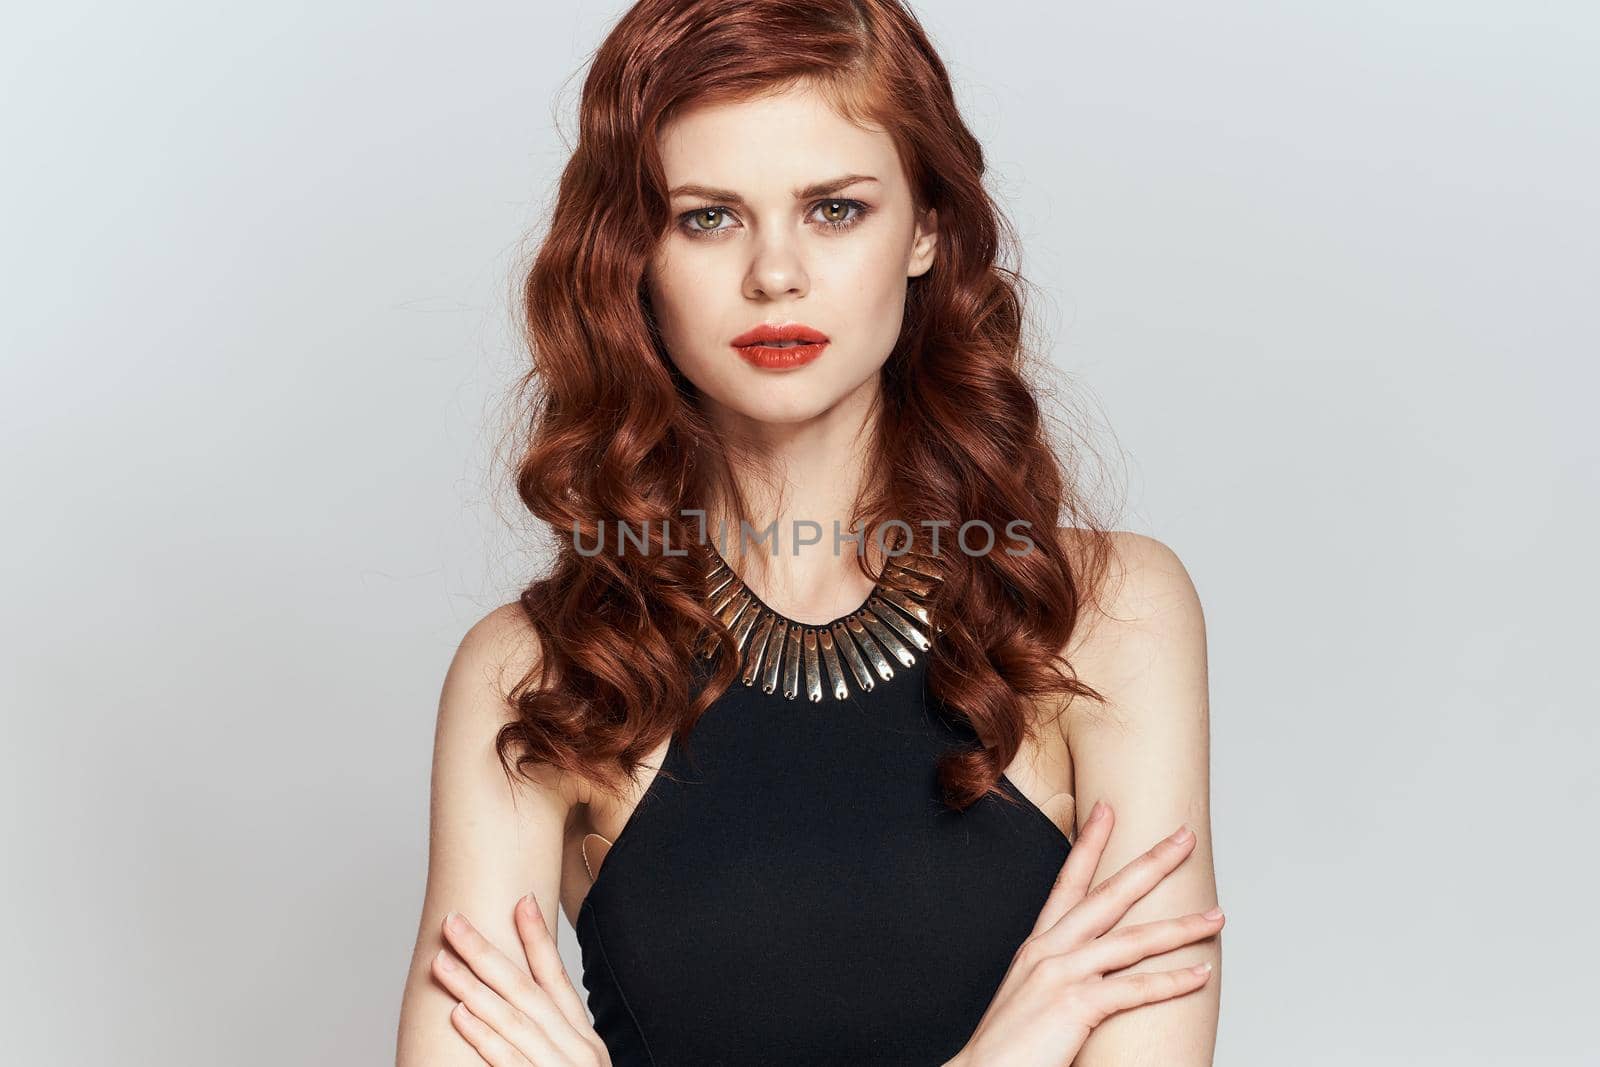 red-haired woman in black dress red lips glamor posing. High quality photo